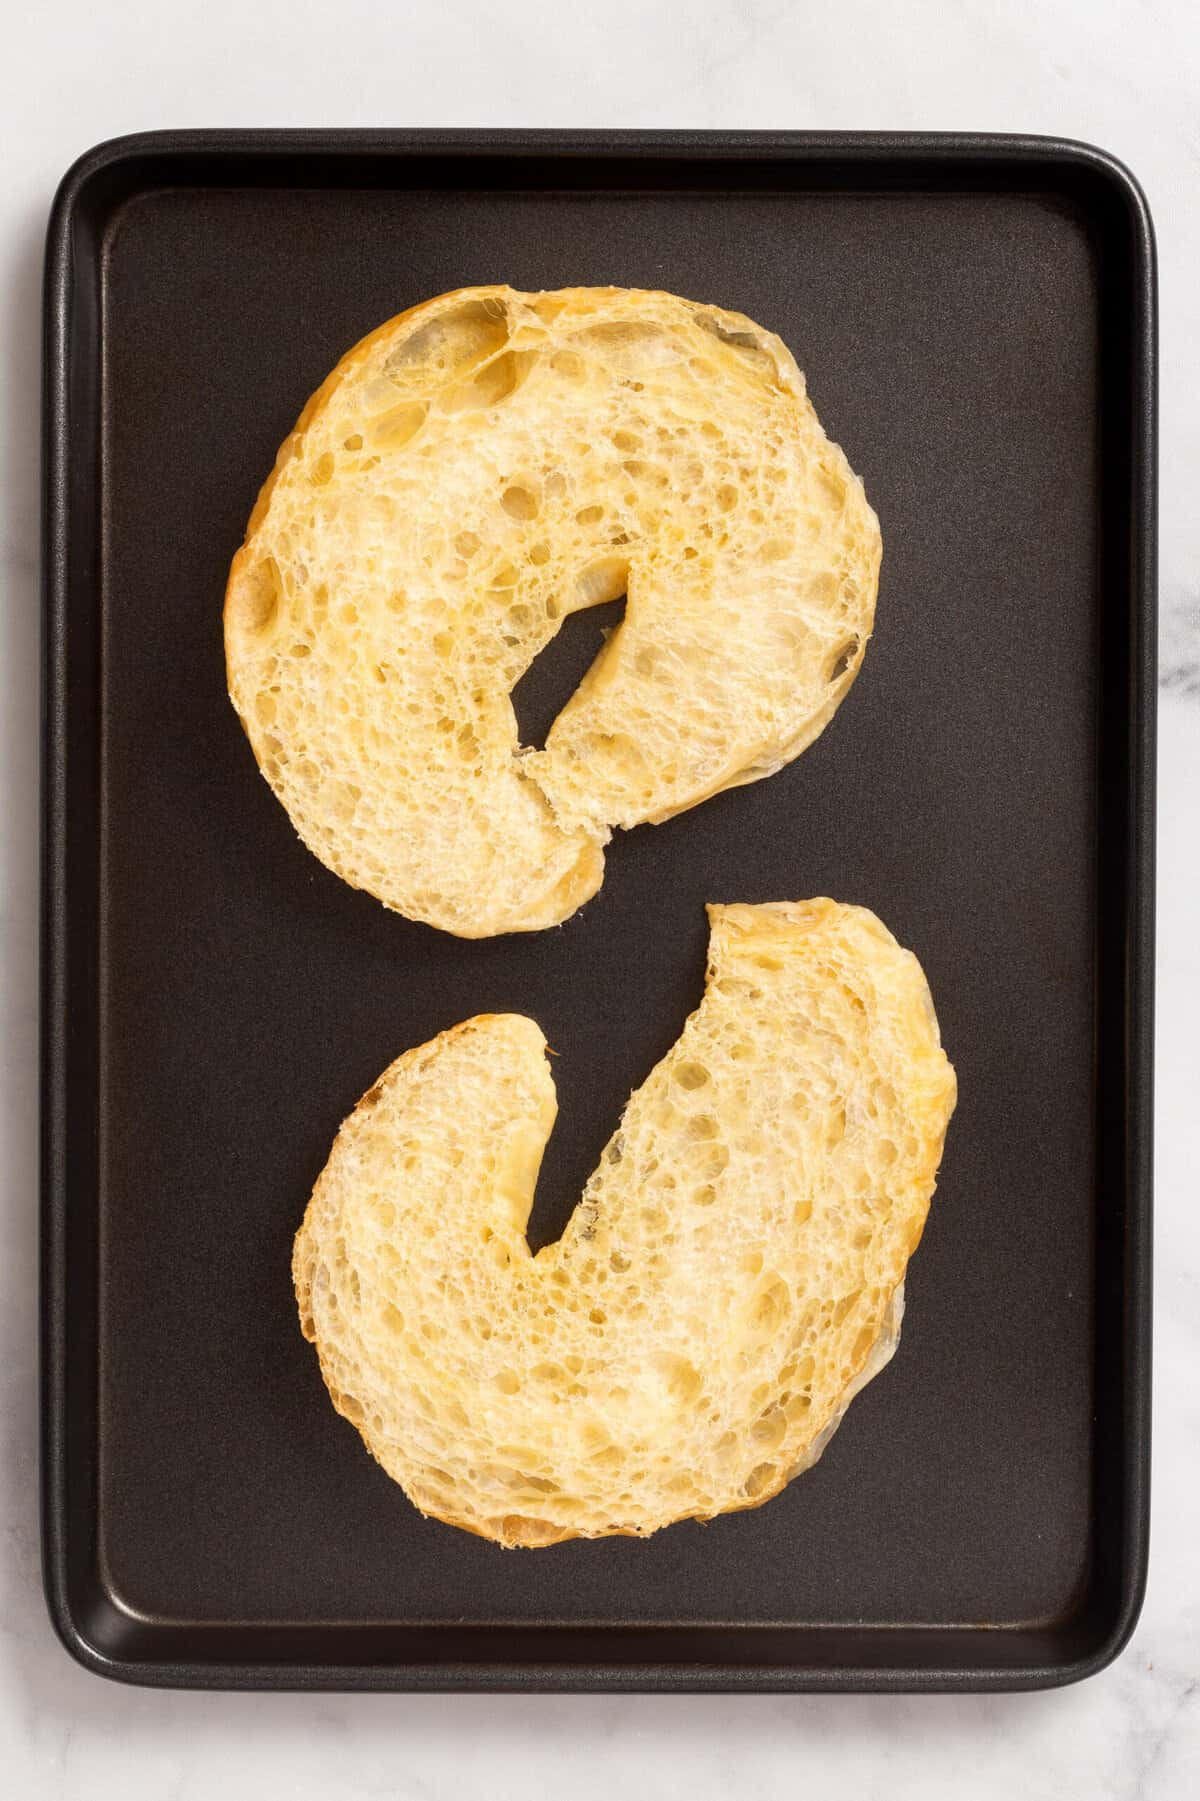 Top down image of a croissant, cut in half and placed on a baking tray.